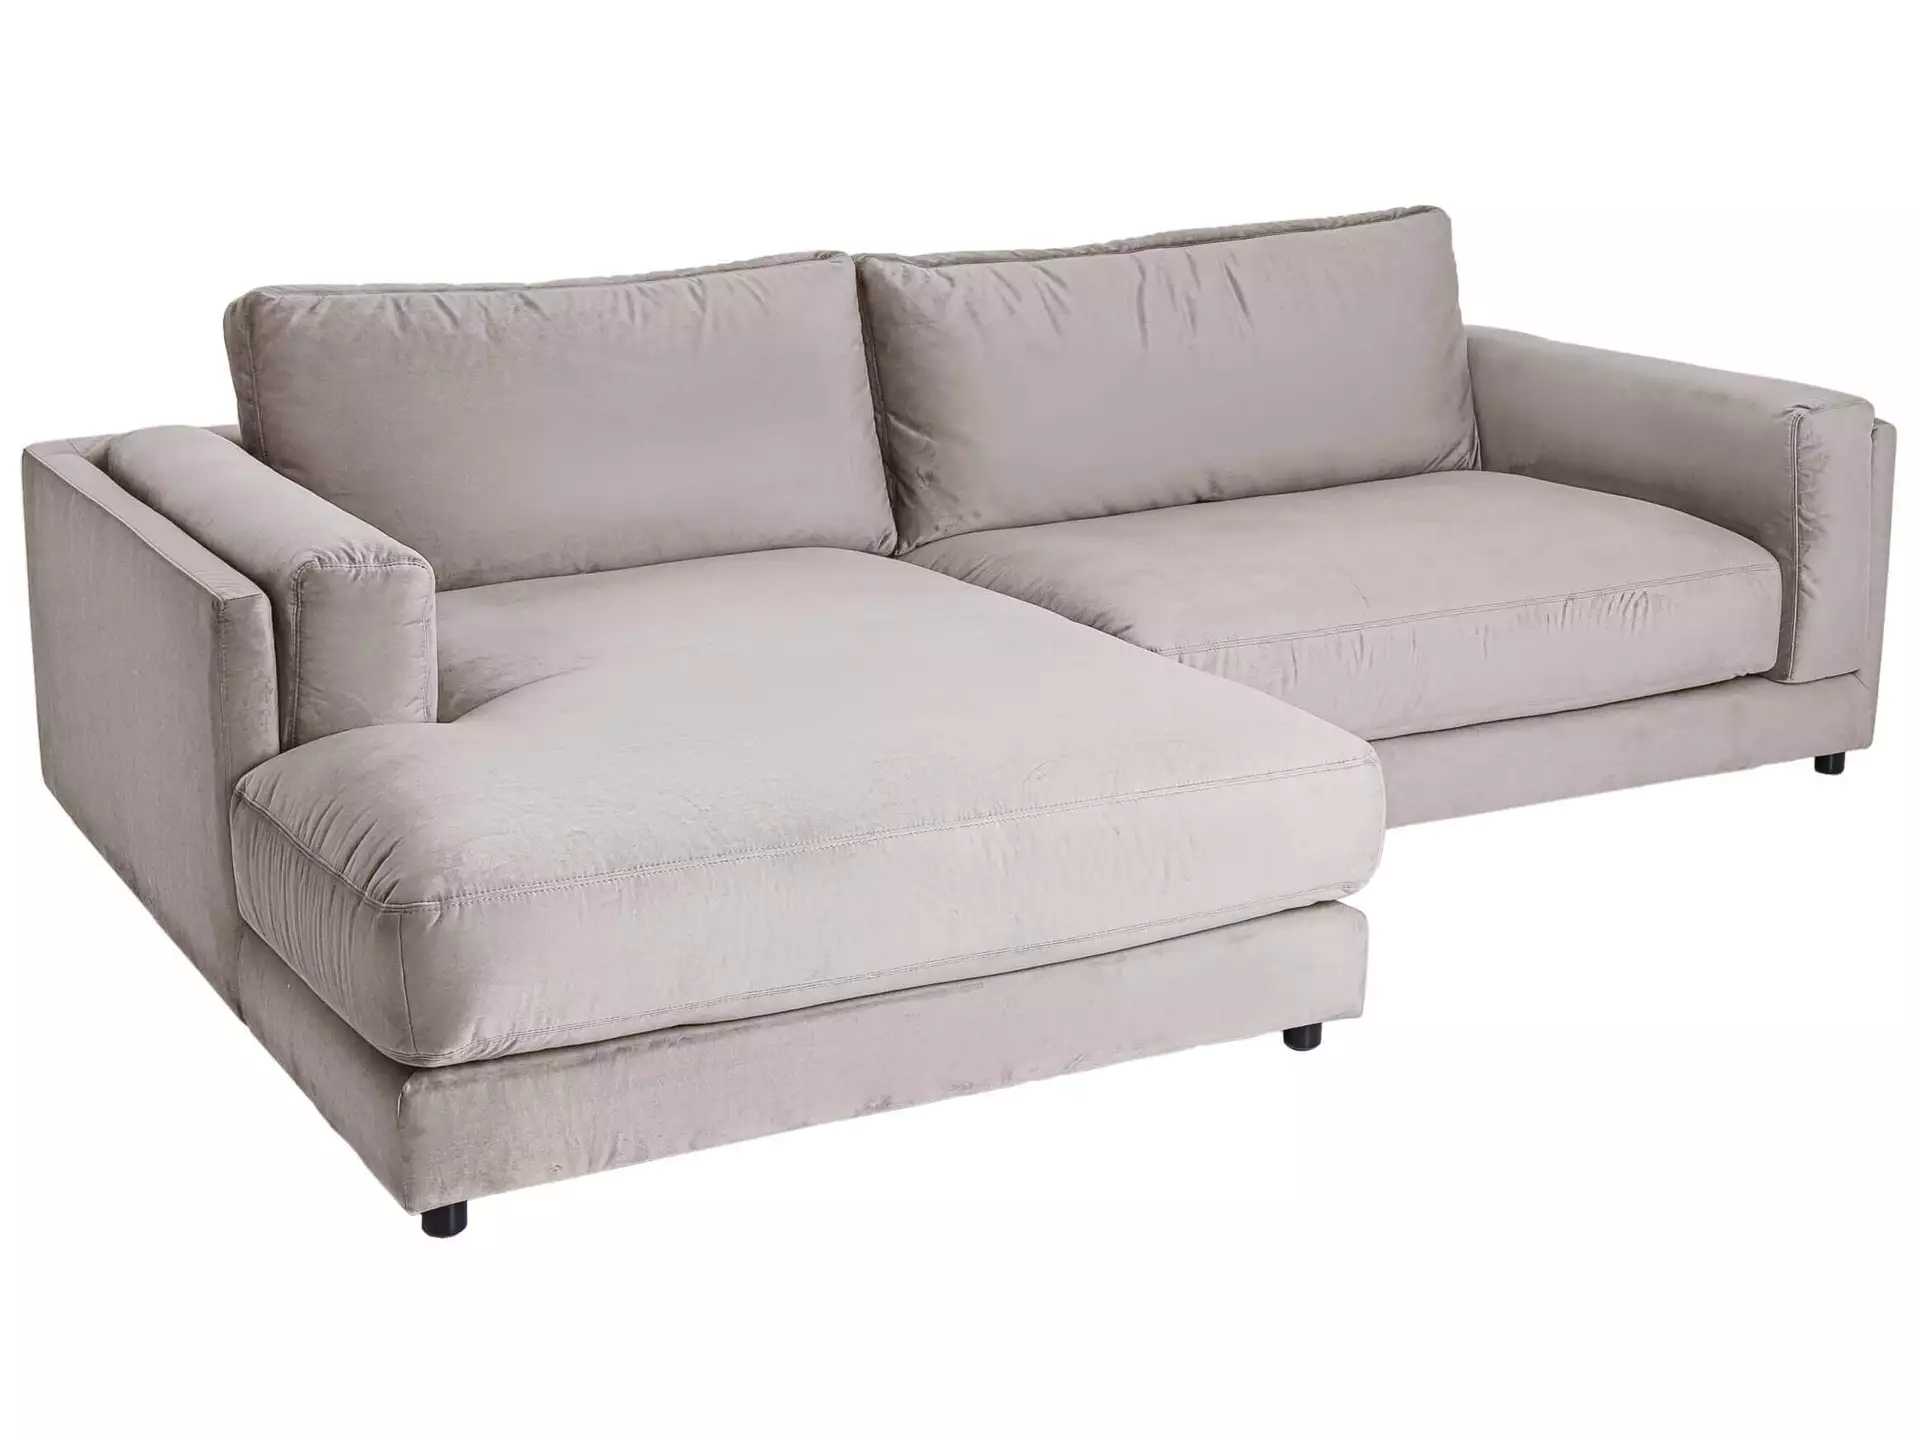 Ecksofa Larry Basic Candy / Farbe: Silver / Bezugsmaterial: Stoff Basic